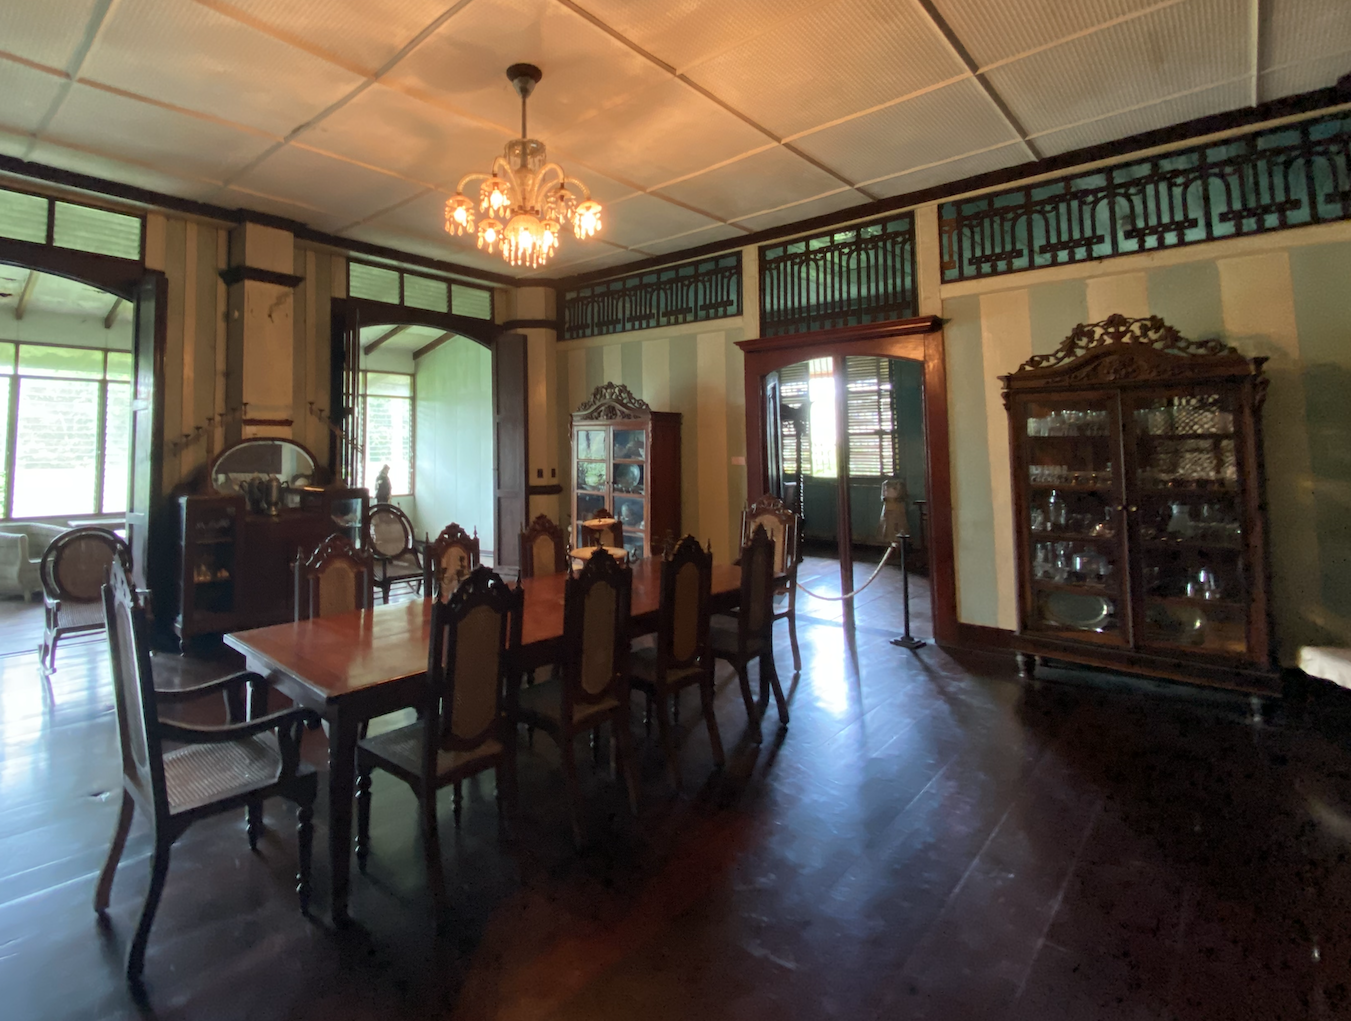 Comedor or dining area of the Alunan-Lizares Ancestral House or Balay Tana Dicang in Talisay, Negros Occidental, 2022 (Photo by Elmer Gatchalian)